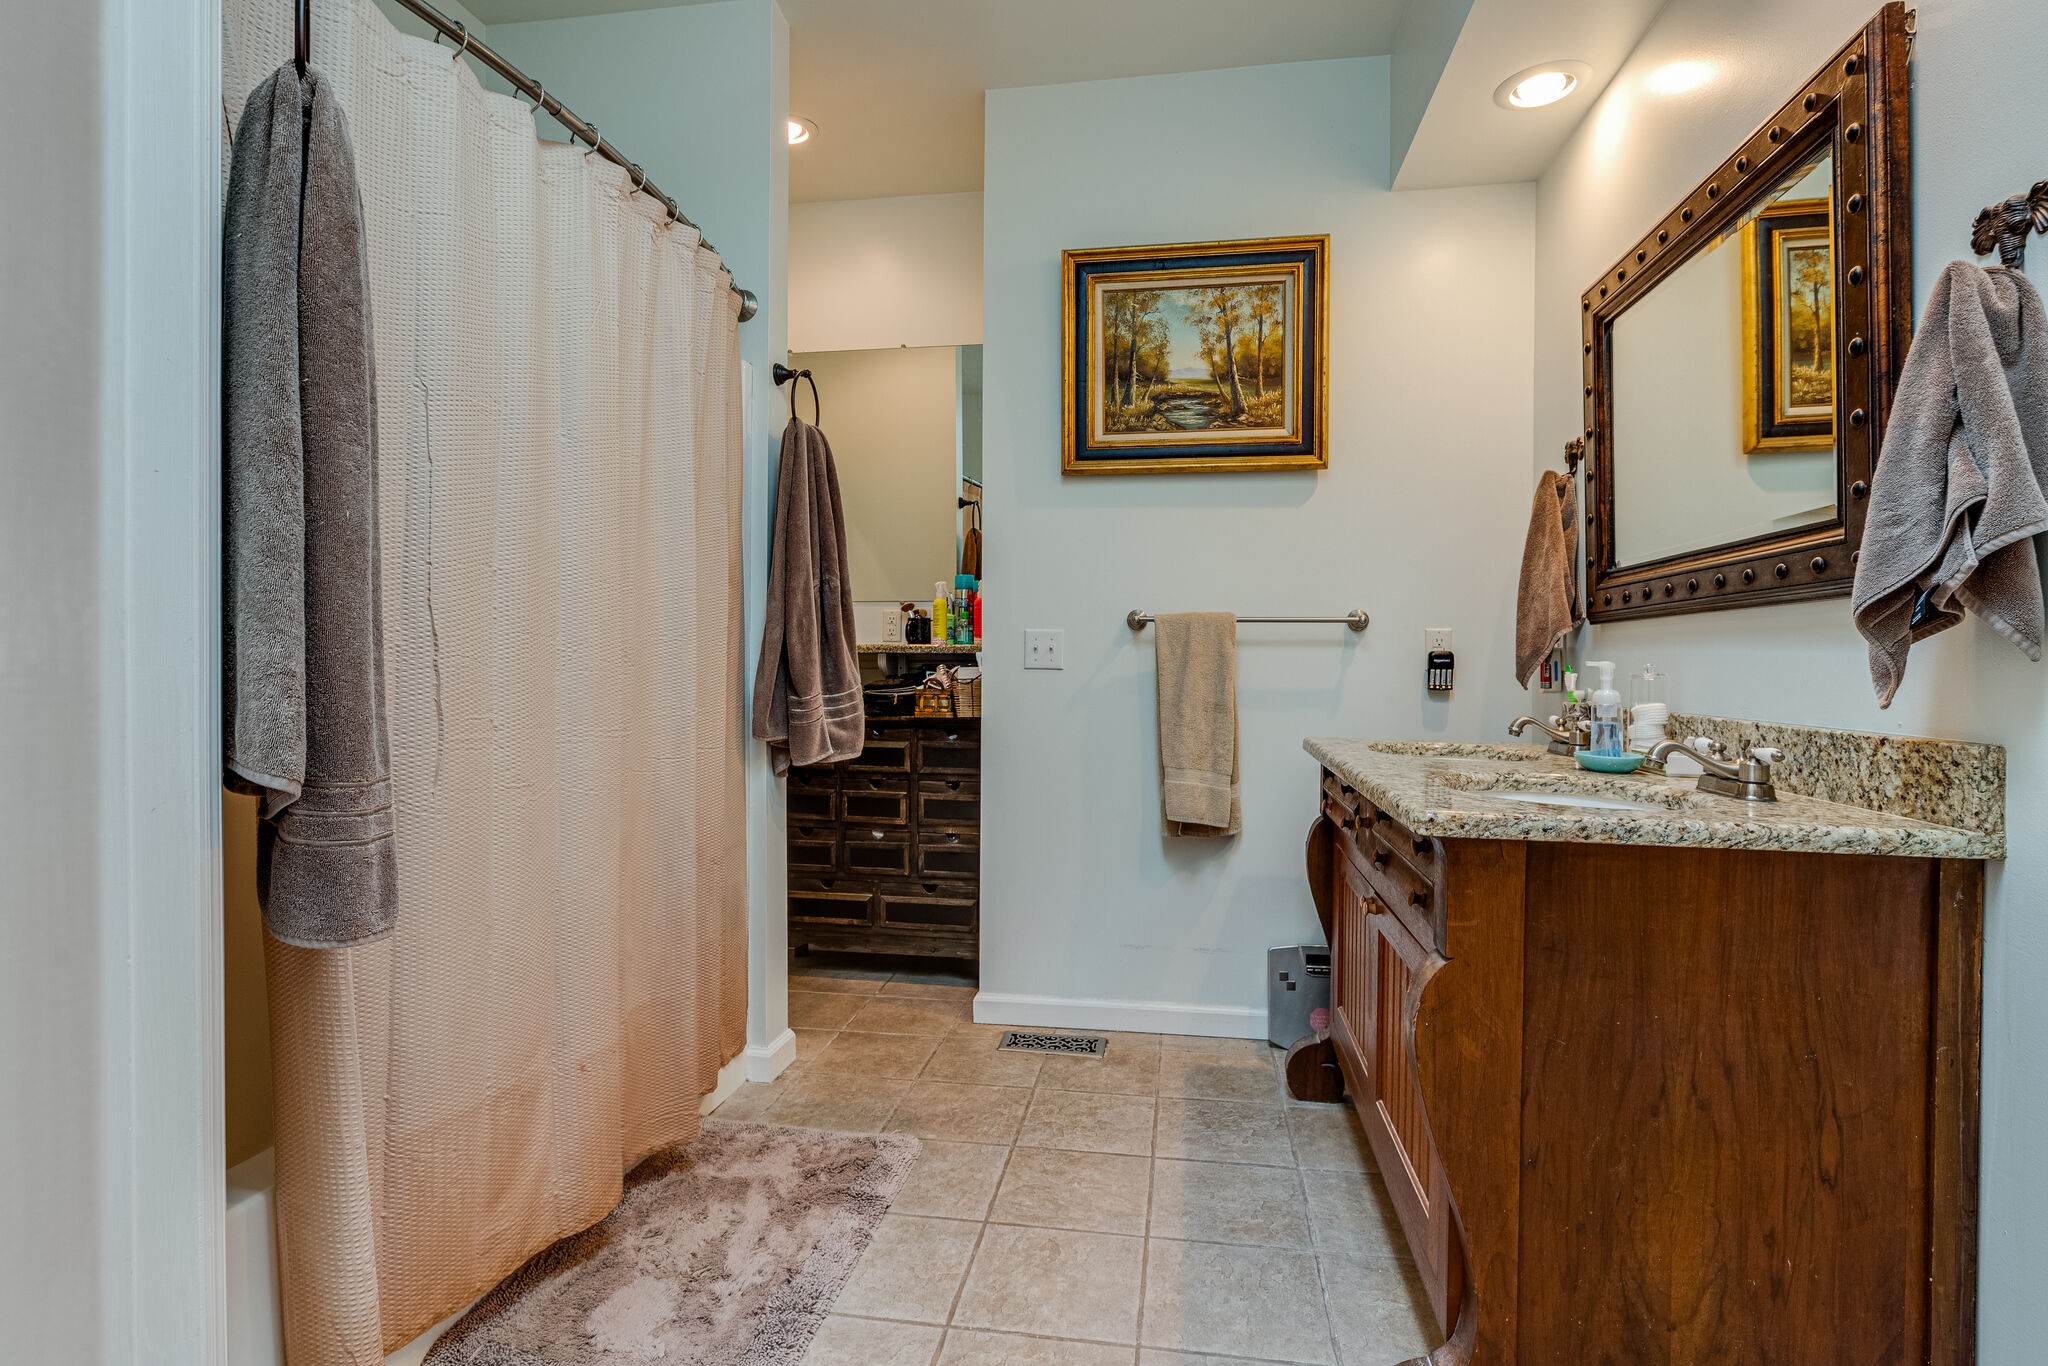 Master Bath presents a tiled floor, a spacious walk-in closet, inviting granite double vanities, and a dedicated make-up area.